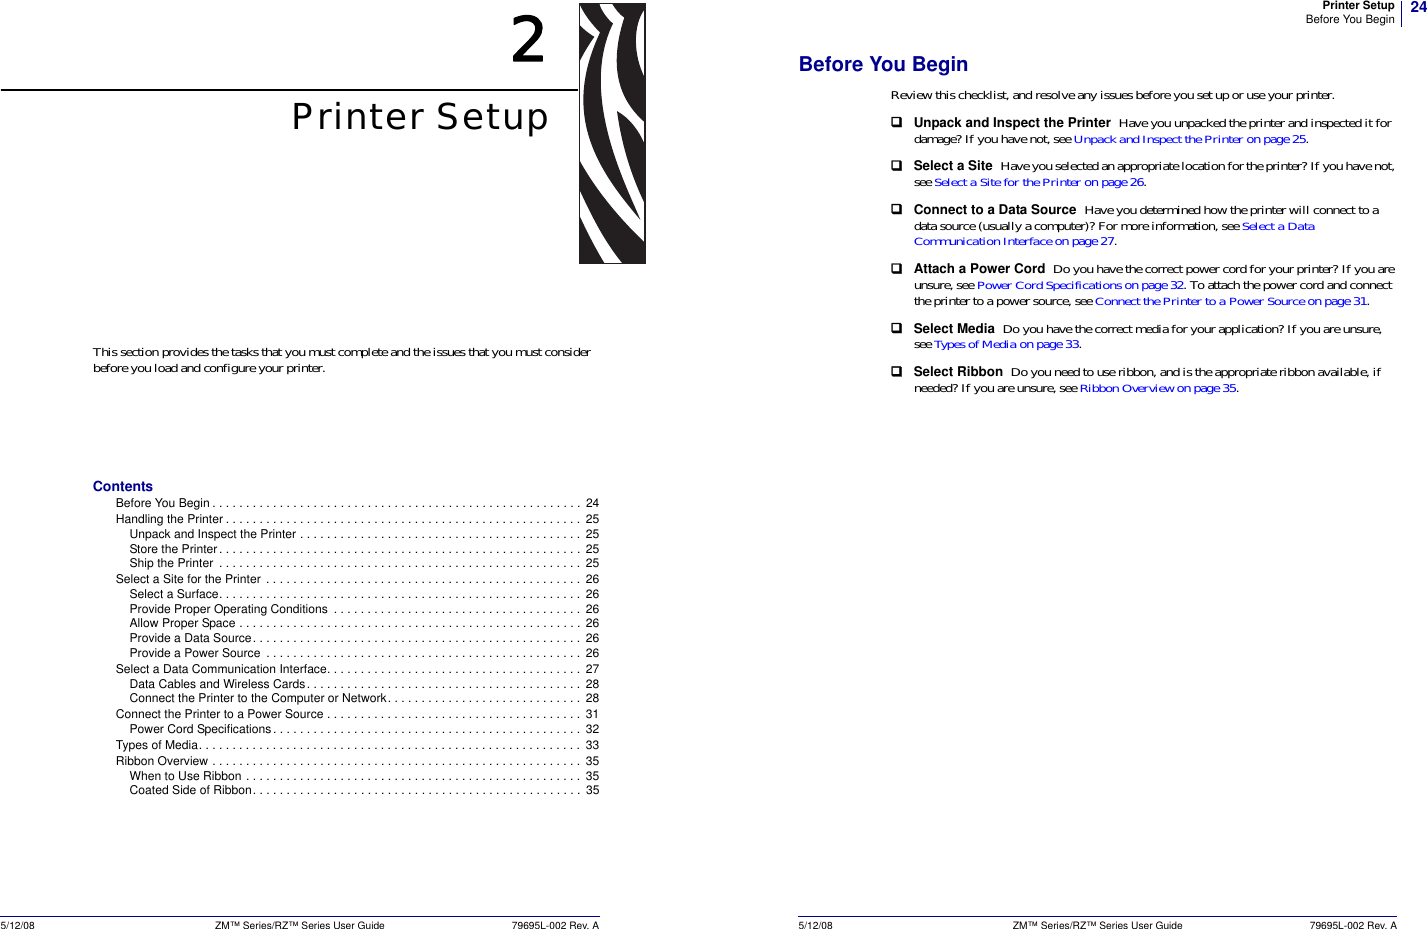 5/12/08 ZM™ Series/RZ™ Series User Guide 79695L-002 Rev. A2Printer SetupThis section provides the tasks that you must complete and the issues that you must consider before you load and configure your printer.ContentsBefore You Begin . . . . . . . . . . . . . . . . . . . . . . . . . . . . . . . . . . . . . . . . . . . . . . . . . . . . . . .  24Handling the Printer . . . . . . . . . . . . . . . . . . . . . . . . . . . . . . . . . . . . . . . . . . . . . . . . . . . . .  25Unpack and Inspect the Printer . . . . . . . . . . . . . . . . . . . . . . . . . . . . . . . . . . . . . . . . . .  25Store the Printer. . . . . . . . . . . . . . . . . . . . . . . . . . . . . . . . . . . . . . . . . . . . . . . . . . . . . .  25Ship the Printer  . . . . . . . . . . . . . . . . . . . . . . . . . . . . . . . . . . . . . . . . . . . . . . . . . . . . . .  25Select a Site for the Printer  . . . . . . . . . . . . . . . . . . . . . . . . . . . . . . . . . . . . . . . . . . . . . . .  26Select a Surface. . . . . . . . . . . . . . . . . . . . . . . . . . . . . . . . . . . . . . . . . . . . . . . . . . . . . .  26Provide Proper Operating Conditions  . . . . . . . . . . . . . . . . . . . . . . . . . . . . . . . . . . . . .  26Allow Proper Space . . . . . . . . . . . . . . . . . . . . . . . . . . . . . . . . . . . . . . . . . . . . . . . . . . .  26Provide a Data Source. . . . . . . . . . . . . . . . . . . . . . . . . . . . . . . . . . . . . . . . . . . . . . . . .  26Provide a Power Source  . . . . . . . . . . . . . . . . . . . . . . . . . . . . . . . . . . . . . . . . . . . . . . .  26Select a Data Communication Interface. . . . . . . . . . . . . . . . . . . . . . . . . . . . . . . . . . . . . .  27Data Cables and Wireless Cards. . . . . . . . . . . . . . . . . . . . . . . . . . . . . . . . . . . . . . . . .  28Connect the Printer to the Computer or Network. . . . . . . . . . . . . . . . . . . . . . . . . . . . .  28Connect the Printer to a Power Source . . . . . . . . . . . . . . . . . . . . . . . . . . . . . . . . . . . . . .  31Power Cord Specifications. . . . . . . . . . . . . . . . . . . . . . . . . . . . . . . . . . . . . . . . . . . . . .  32Types of Media. . . . . . . . . . . . . . . . . . . . . . . . . . . . . . . . . . . . . . . . . . . . . . . . . . . . . . . . . 33Ribbon Overview . . . . . . . . . . . . . . . . . . . . . . . . . . . . . . . . . . . . . . . . . . . . . . . . . . . . . . .  35When to Use Ribbon . . . . . . . . . . . . . . . . . . . . . . . . . . . . . . . . . . . . . . . . . . . . . . . . . .  35Coated Side of Ribbon. . . . . . . . . . . . . . . . . . . . . . . . . . . . . . . . . . . . . . . . . . . . . . . . .  3524Printer SetupBefore You Begin5/12/08 ZM™ Series/RZ™ Series User Guide 79695L-002 Rev. ABefore You BeginReview this checklist, and resolve any issues before you set up or use your printer.Unpack and Inspect the Printer  Have you unpacked the printer and inspected it for damage? If you have not, see Unpack and Inspect the Printer on page 25.Select a Site  Have you selected an appropriate location for the printer? If you have not, see Select a Site for the Printer on page 26.Connect to a Data Source  Have you determined how the printer will connect to a data source (usually a computer)? For more information, see Select a Data Communication Interface on page 27.Attach a Power Cord  Do you have the correct power cord for your printer? If you are unsure, see Power Cord Specifications on page 32. To attach the power cord and connect the printer to a power source, see Connect the Printer to a Power Source on page 31.Select Media  Do you have the correct media for your application? If you are unsure, see Types of Media on page 33.Select Ribbon  Do you need to use ribbon, and is the appropriate ribbon available, if needed? If you are unsure, see Ribbon Overview on page 35.